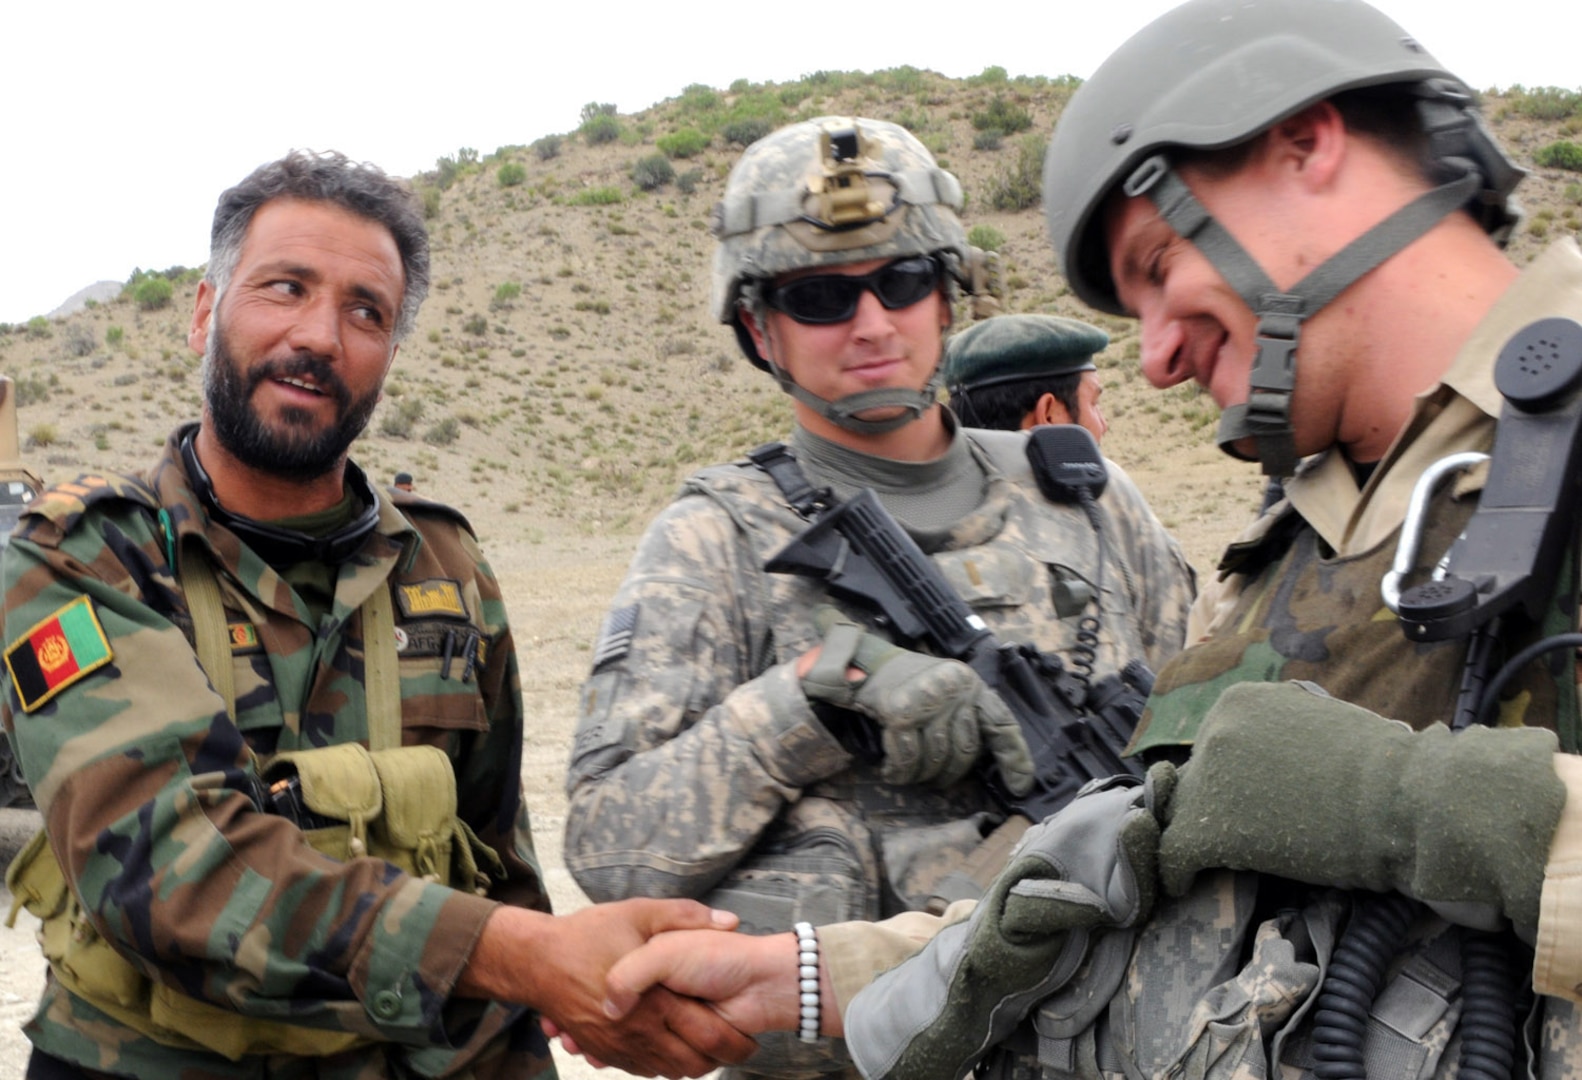 U.S. Army 2nd Lt. Dan Silver, platoon leader from Dover, N.H., of 4th Platoon, D Company, 3rd Battalion, 172nd Infantry Regiment smiles as his Macedonian counterpart Capt. Burche Turturov, the commander of the Macedonian Ranger Platoon from Skopje, Macedonia, shakes hands with an Afghan National Army soldier during a patrol, June 5. The Macedonians are embedded with the D Company Soldiers of the Vermont National Guard as part of their state Partnership for Peace Program. They are the first state partnership involved in the program to embed and run combat operations.